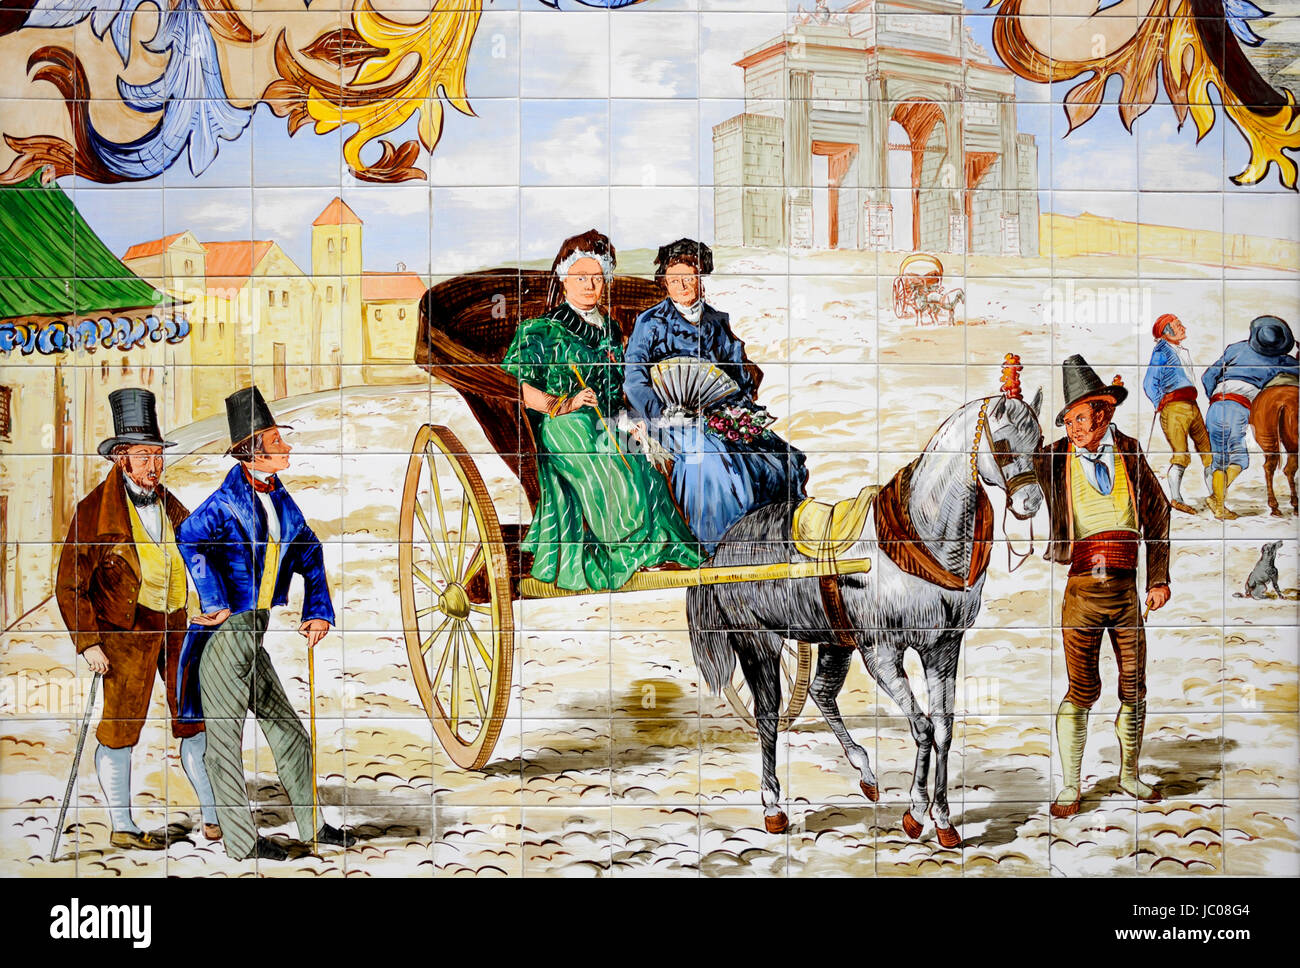 Madrid, Spain. La Chata Restaurant in Cava Baja. Famous Tiled Facade. Detail of ladies in carriage Stock Photo